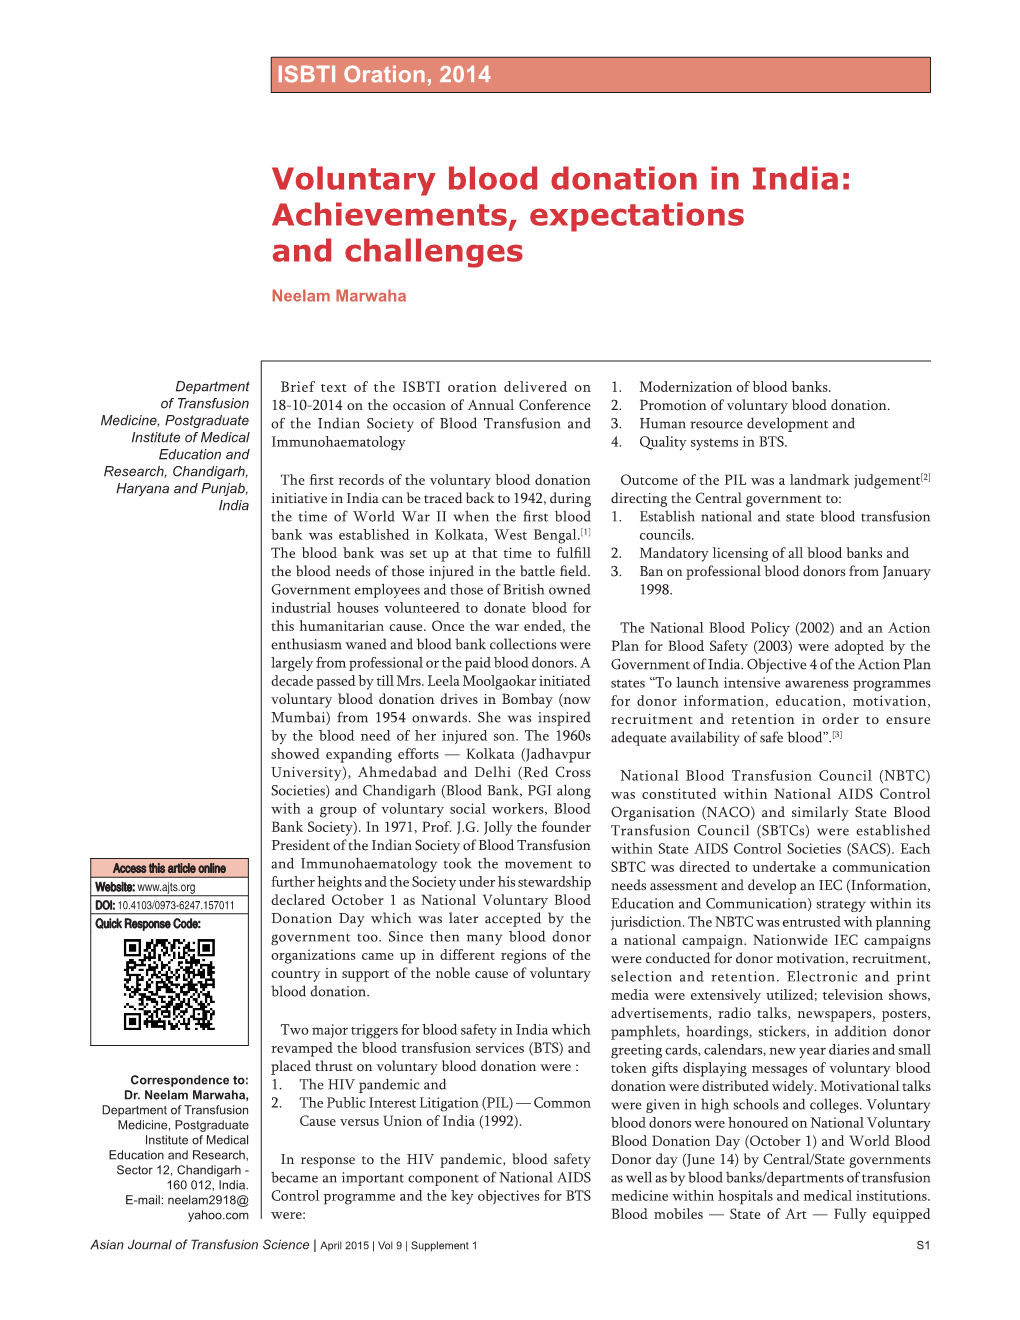 Voluntary Blood Donation in India: Achievements, Expectations and Challenges